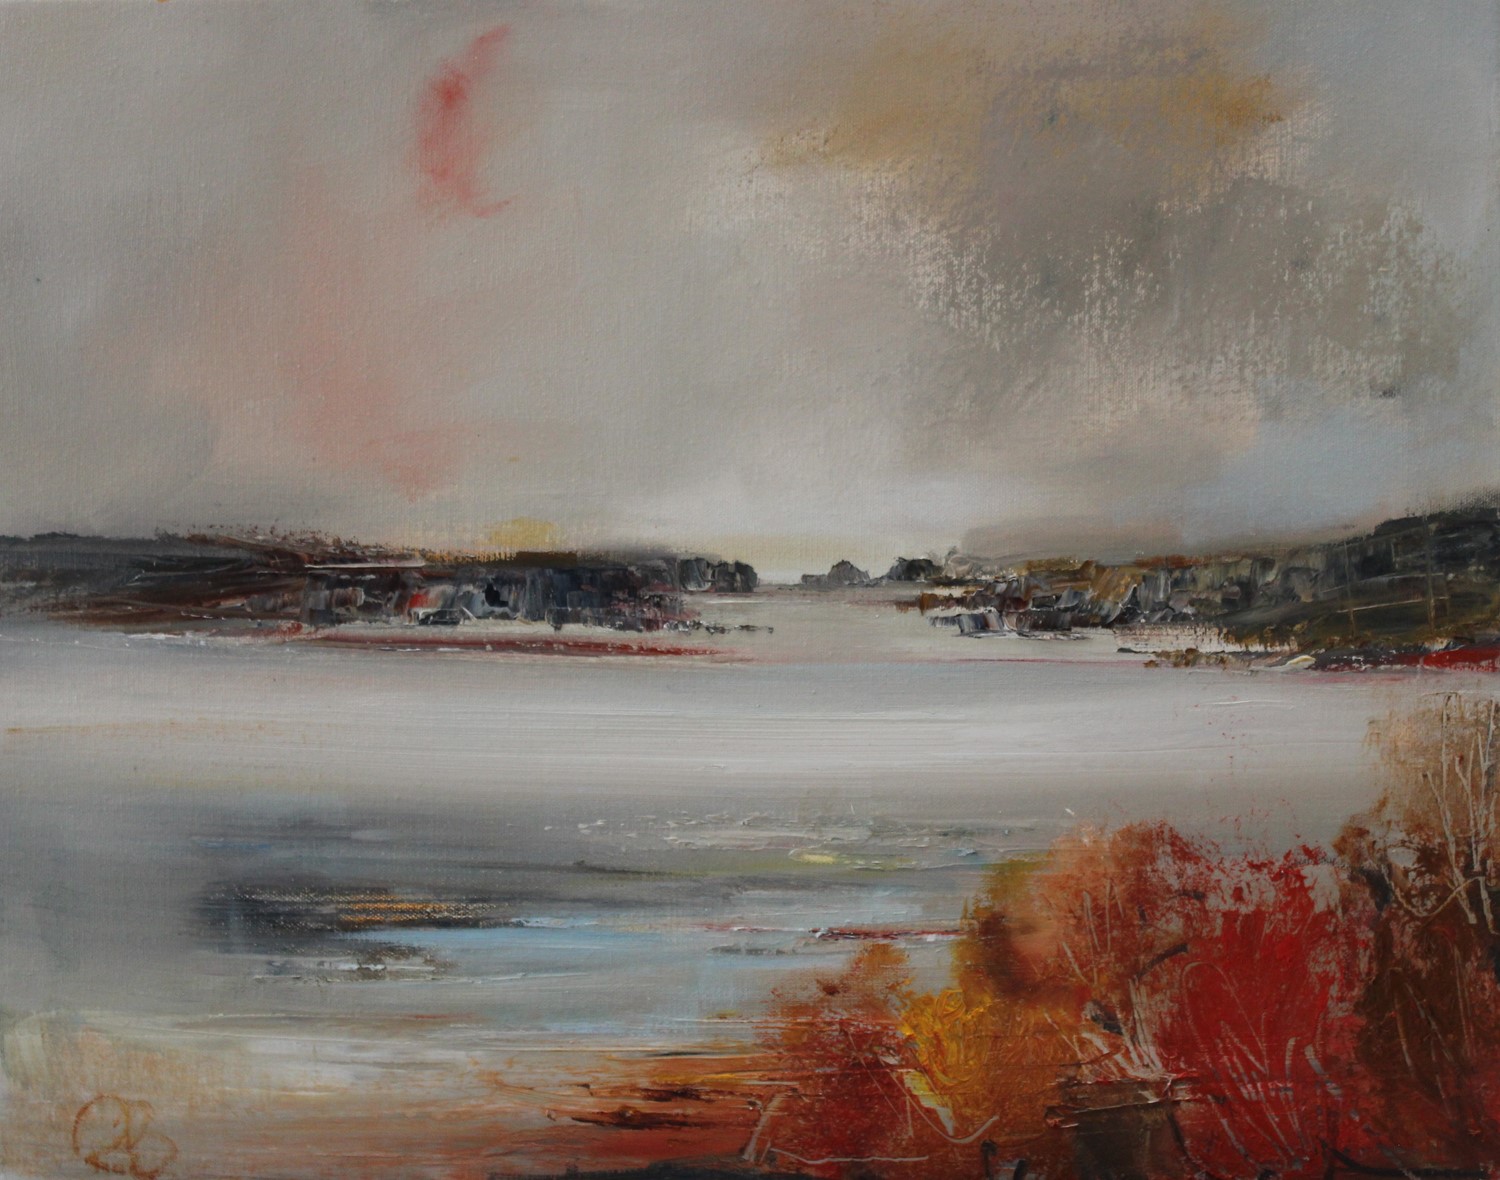 'With An Autumnal Feel' by artist Rosanne Barr